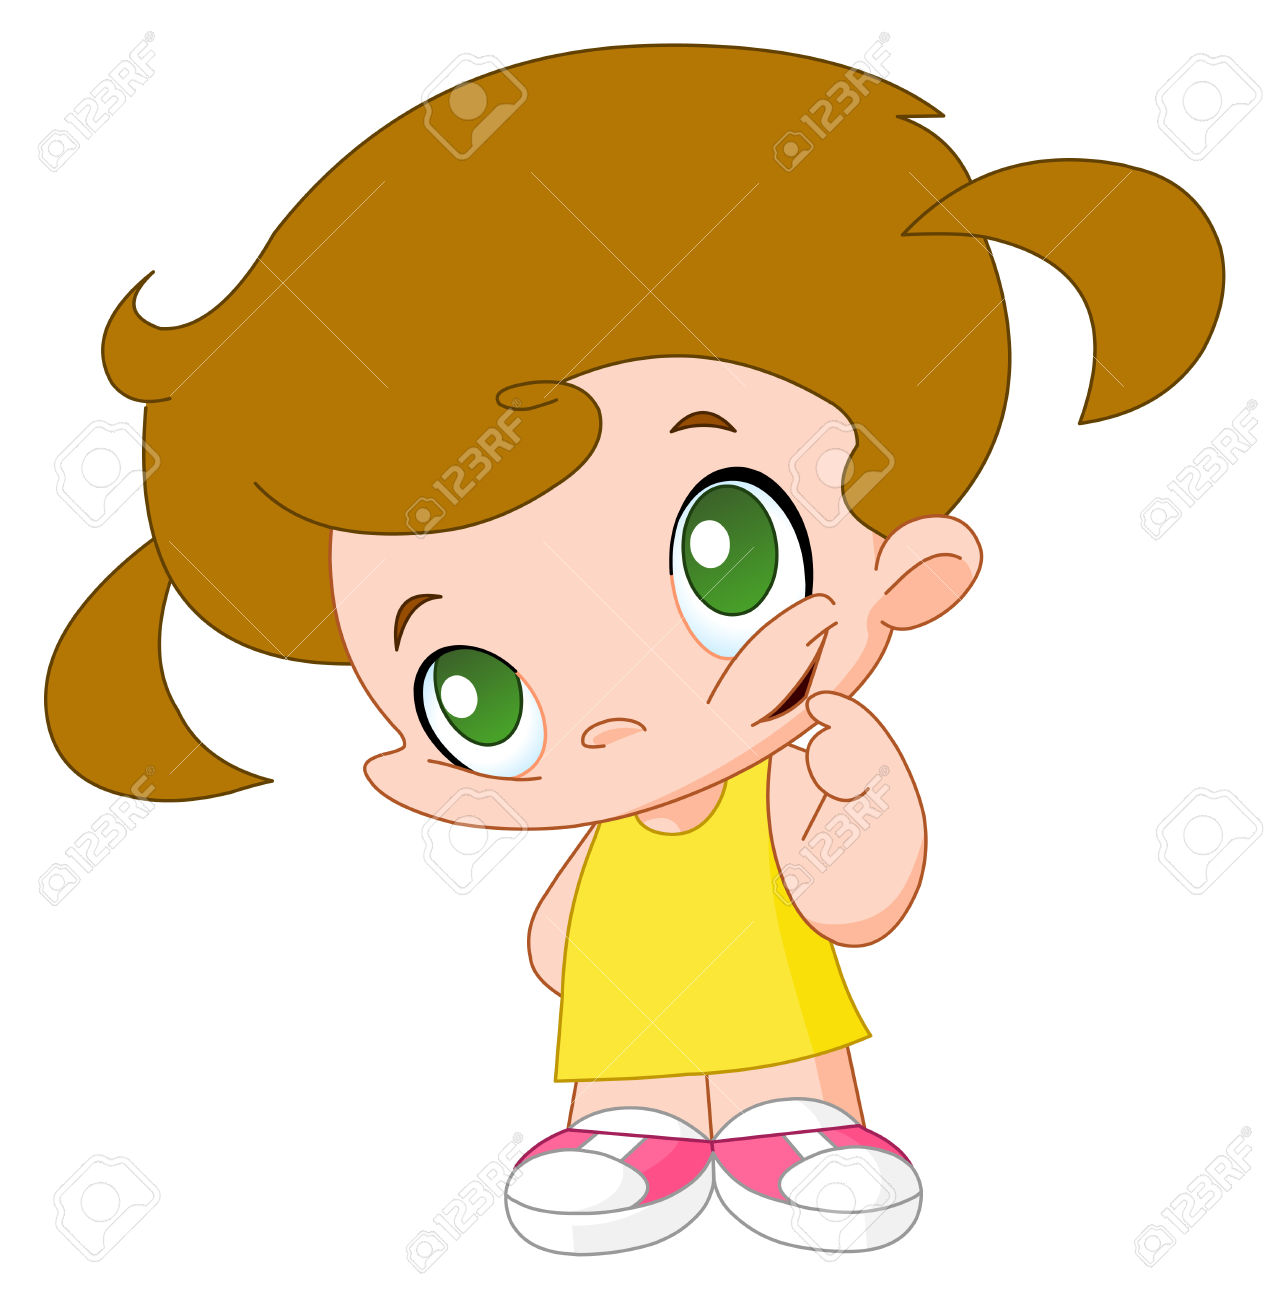 Cute Little Girl Cartoon Images Clipart | Free download on ...